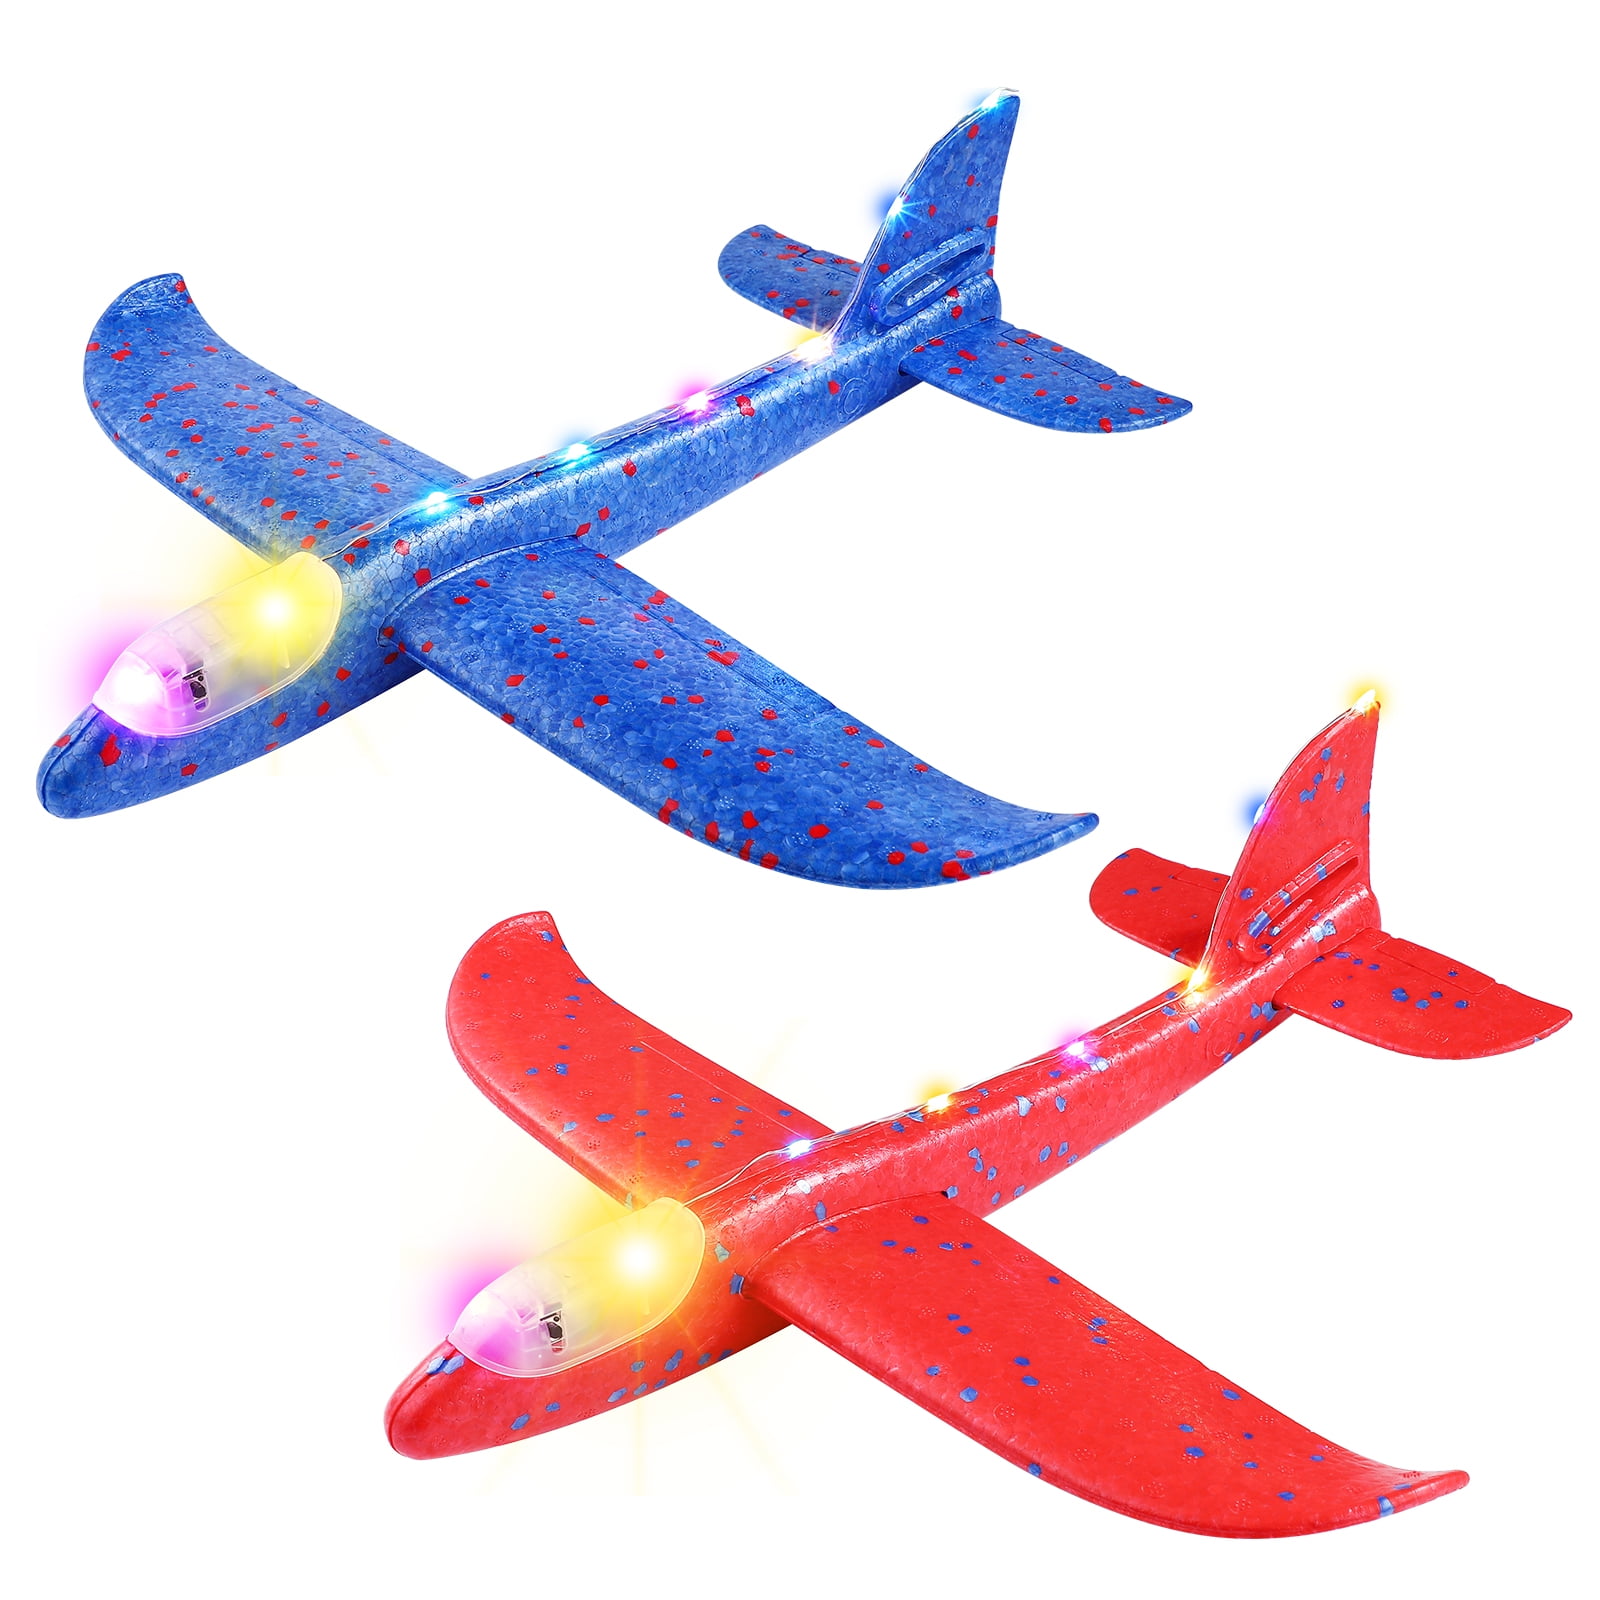 2pcs Foam Airplane Toy 16.5 Large Throwing Glider Plane with Dual Flight Mode for Kids Outdoor Sports Garden Yard Playing 